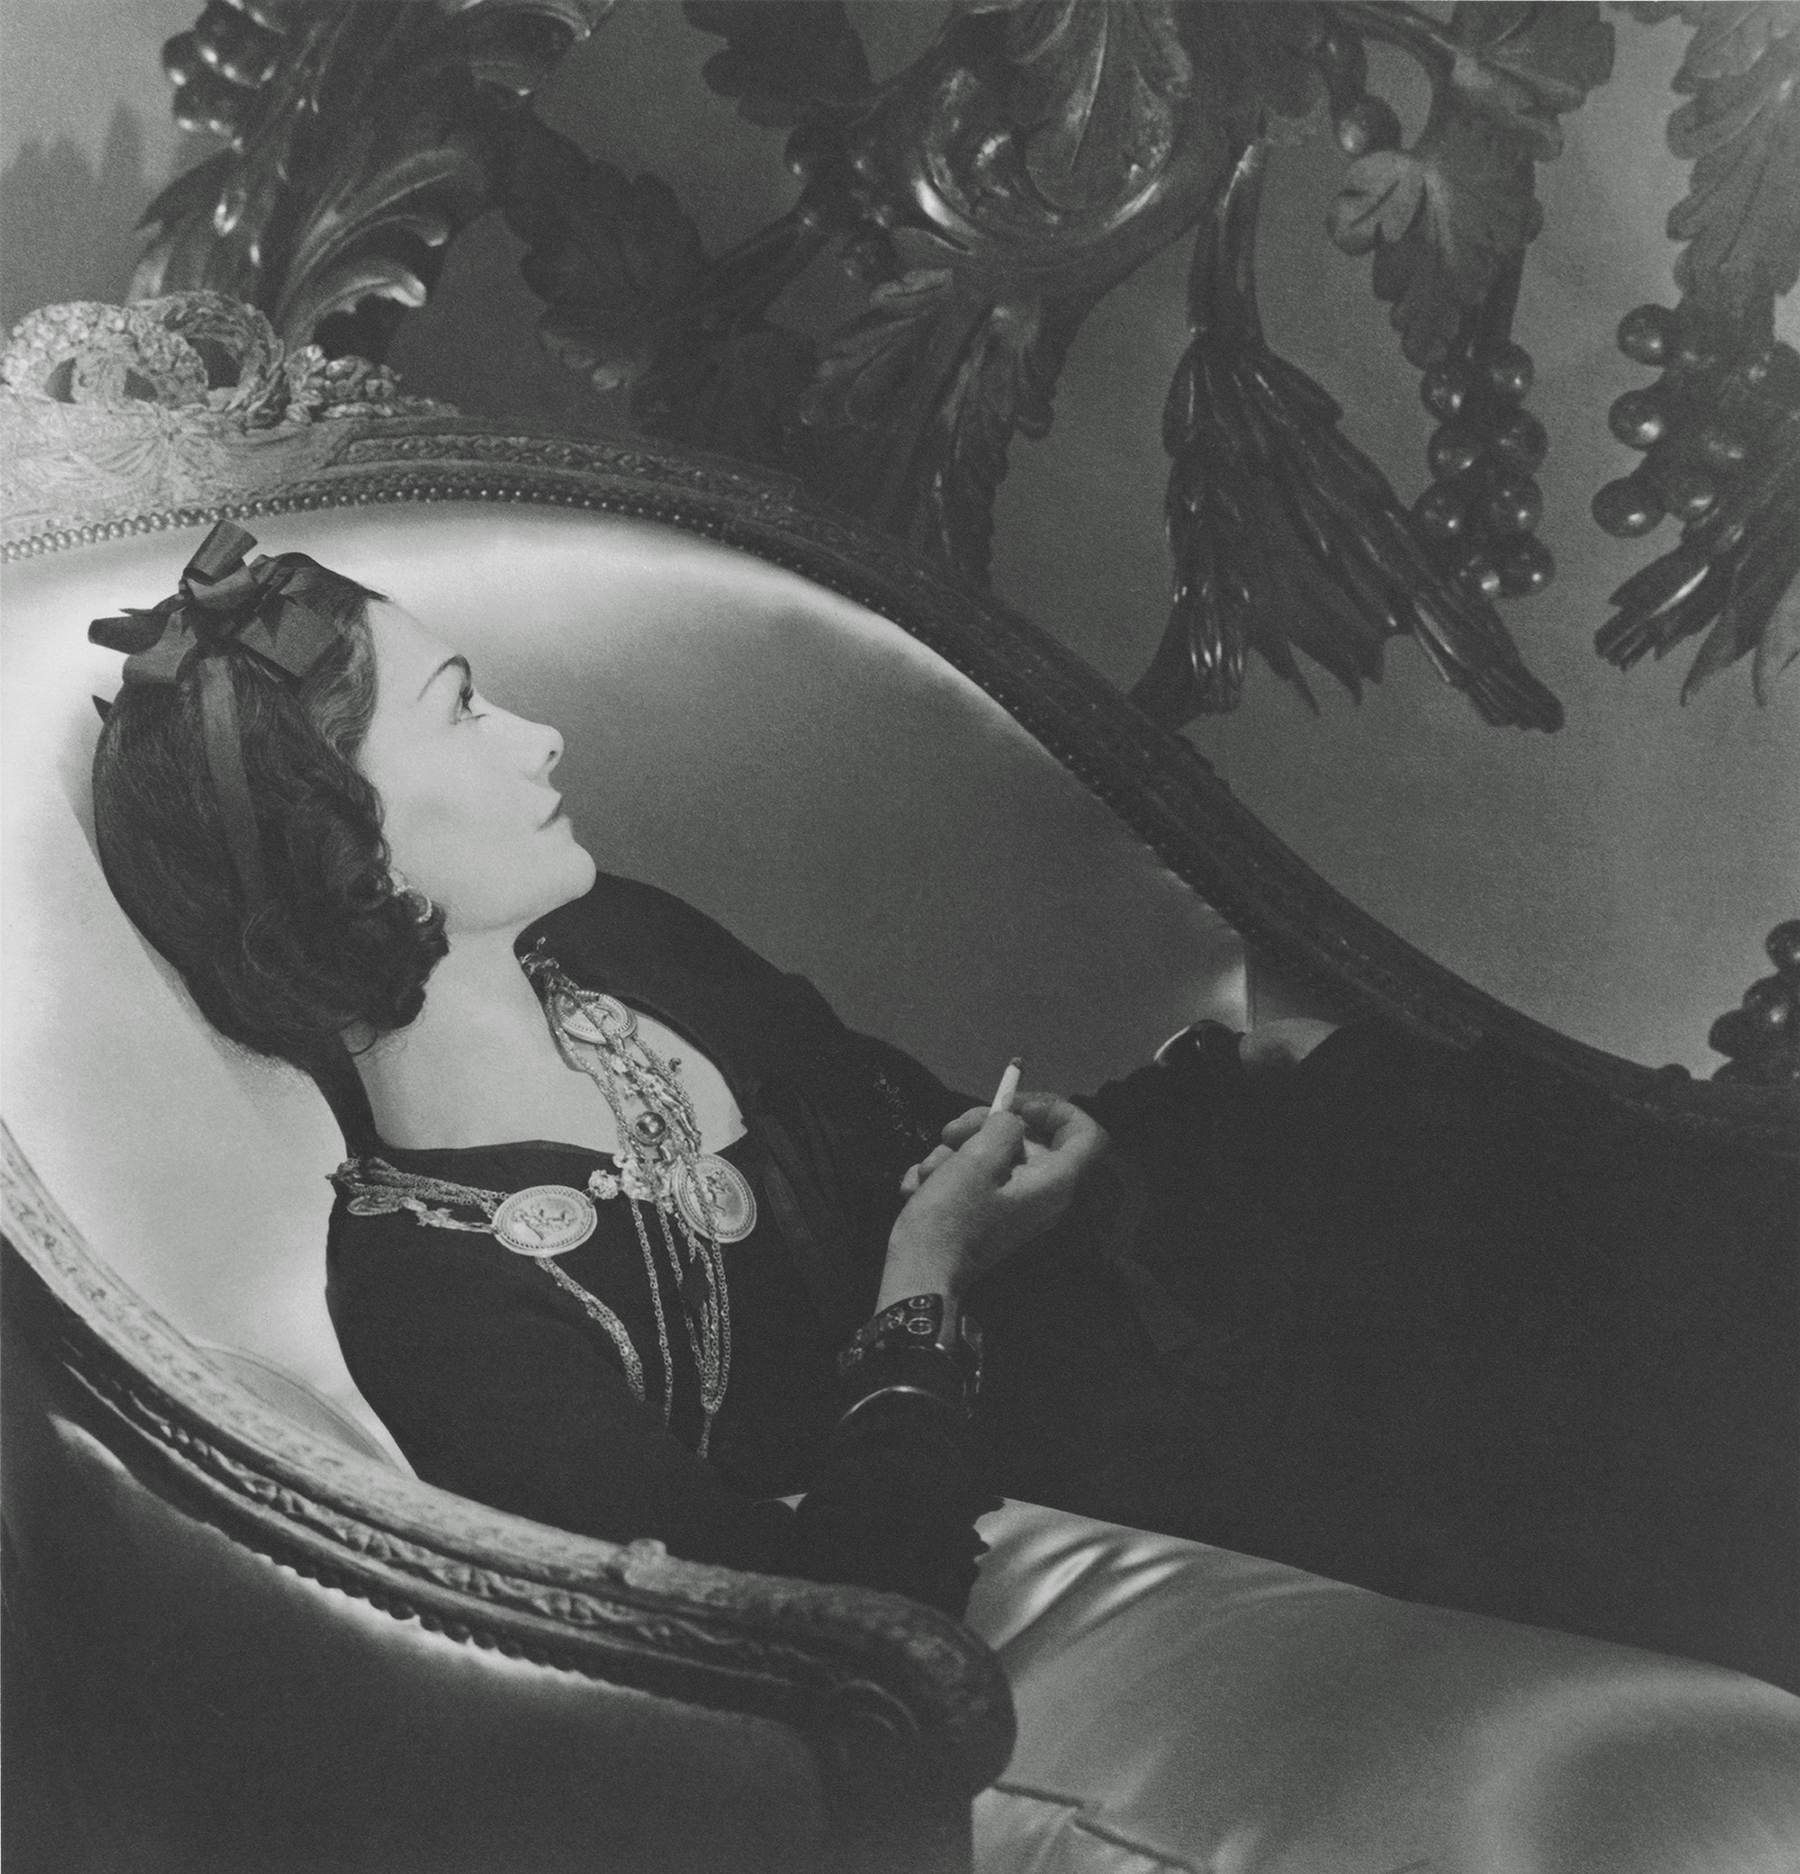 1937, Paris, France --- French fashion designer Coco Channel, in profile reclining on a chaise lounge with cigarette, wearing a dark dress with gold medallion necklaces and a ribbon in her hair; photographed in Paris in 1937. --- Image by Æ Cond⁄ Nast Archive/CORBIS